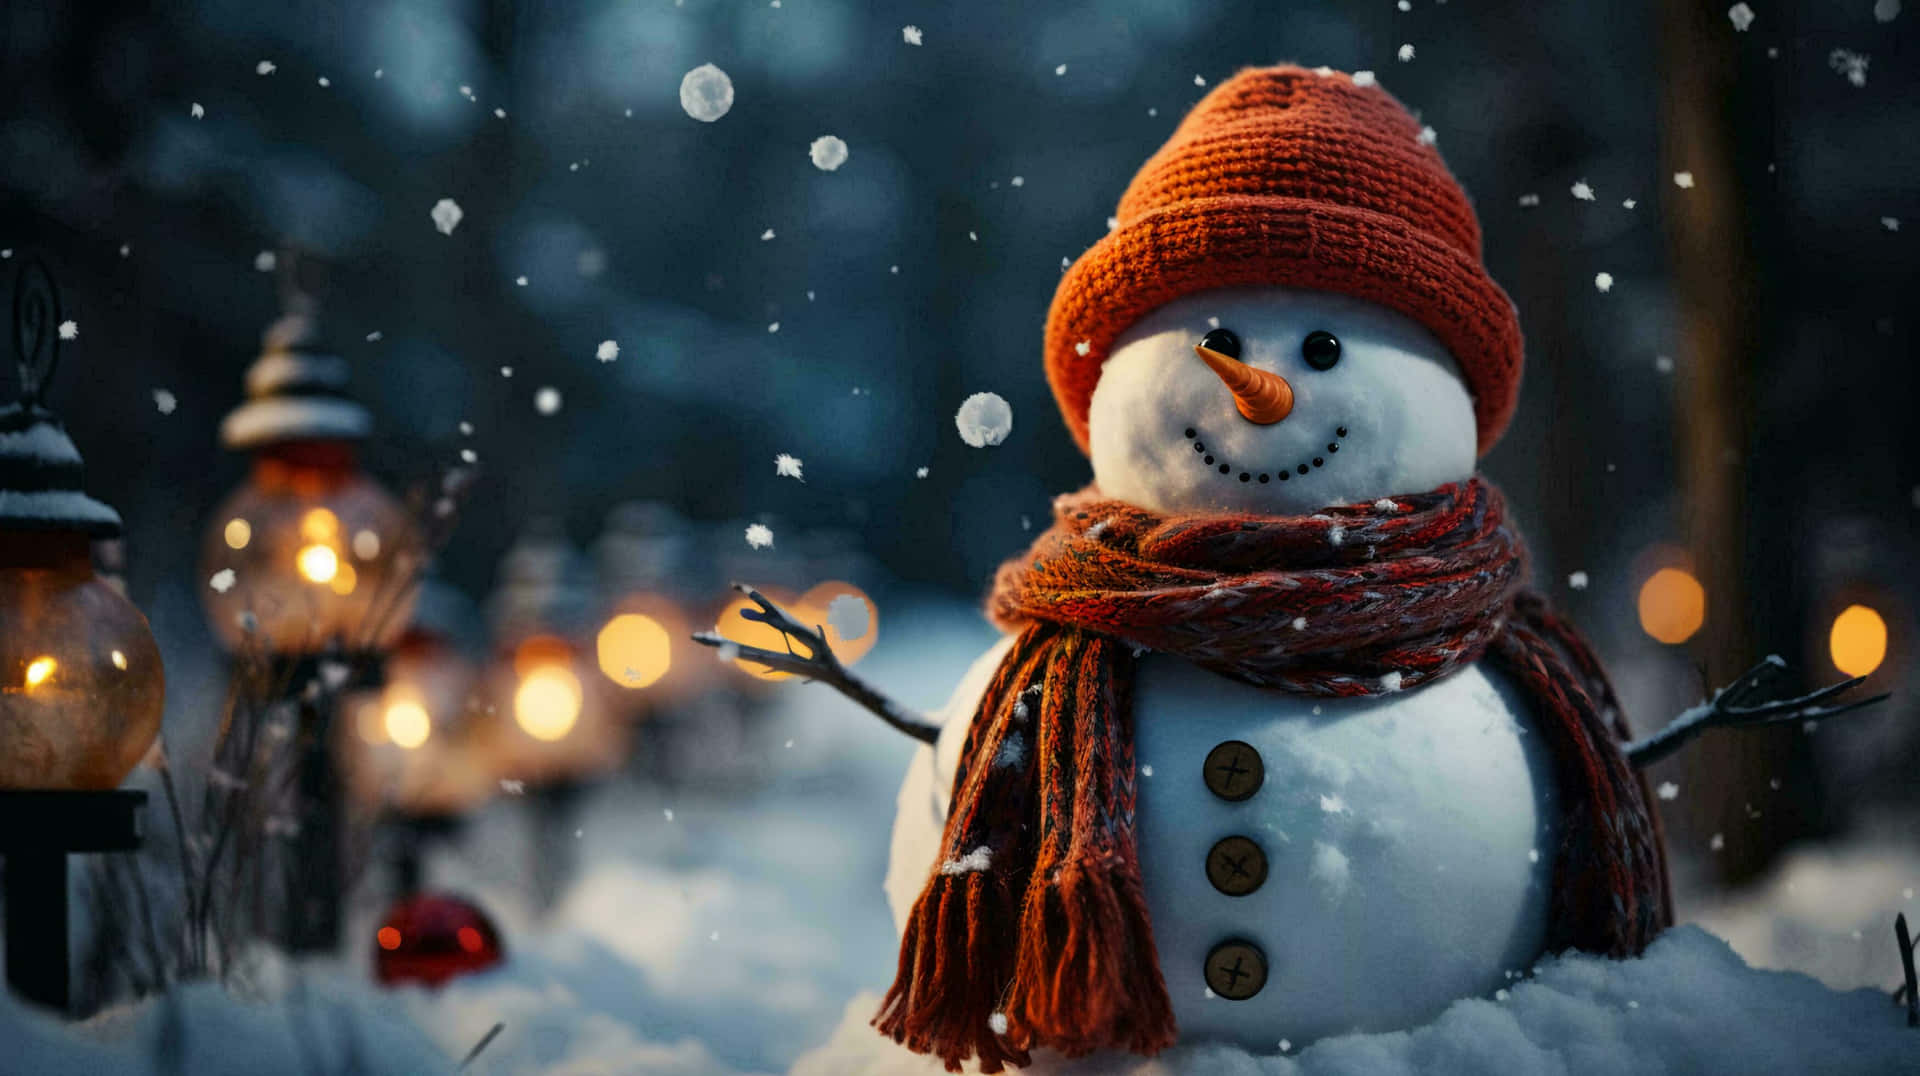 Charming Winter Snowmanwith Scarfand Hat Wallpaper